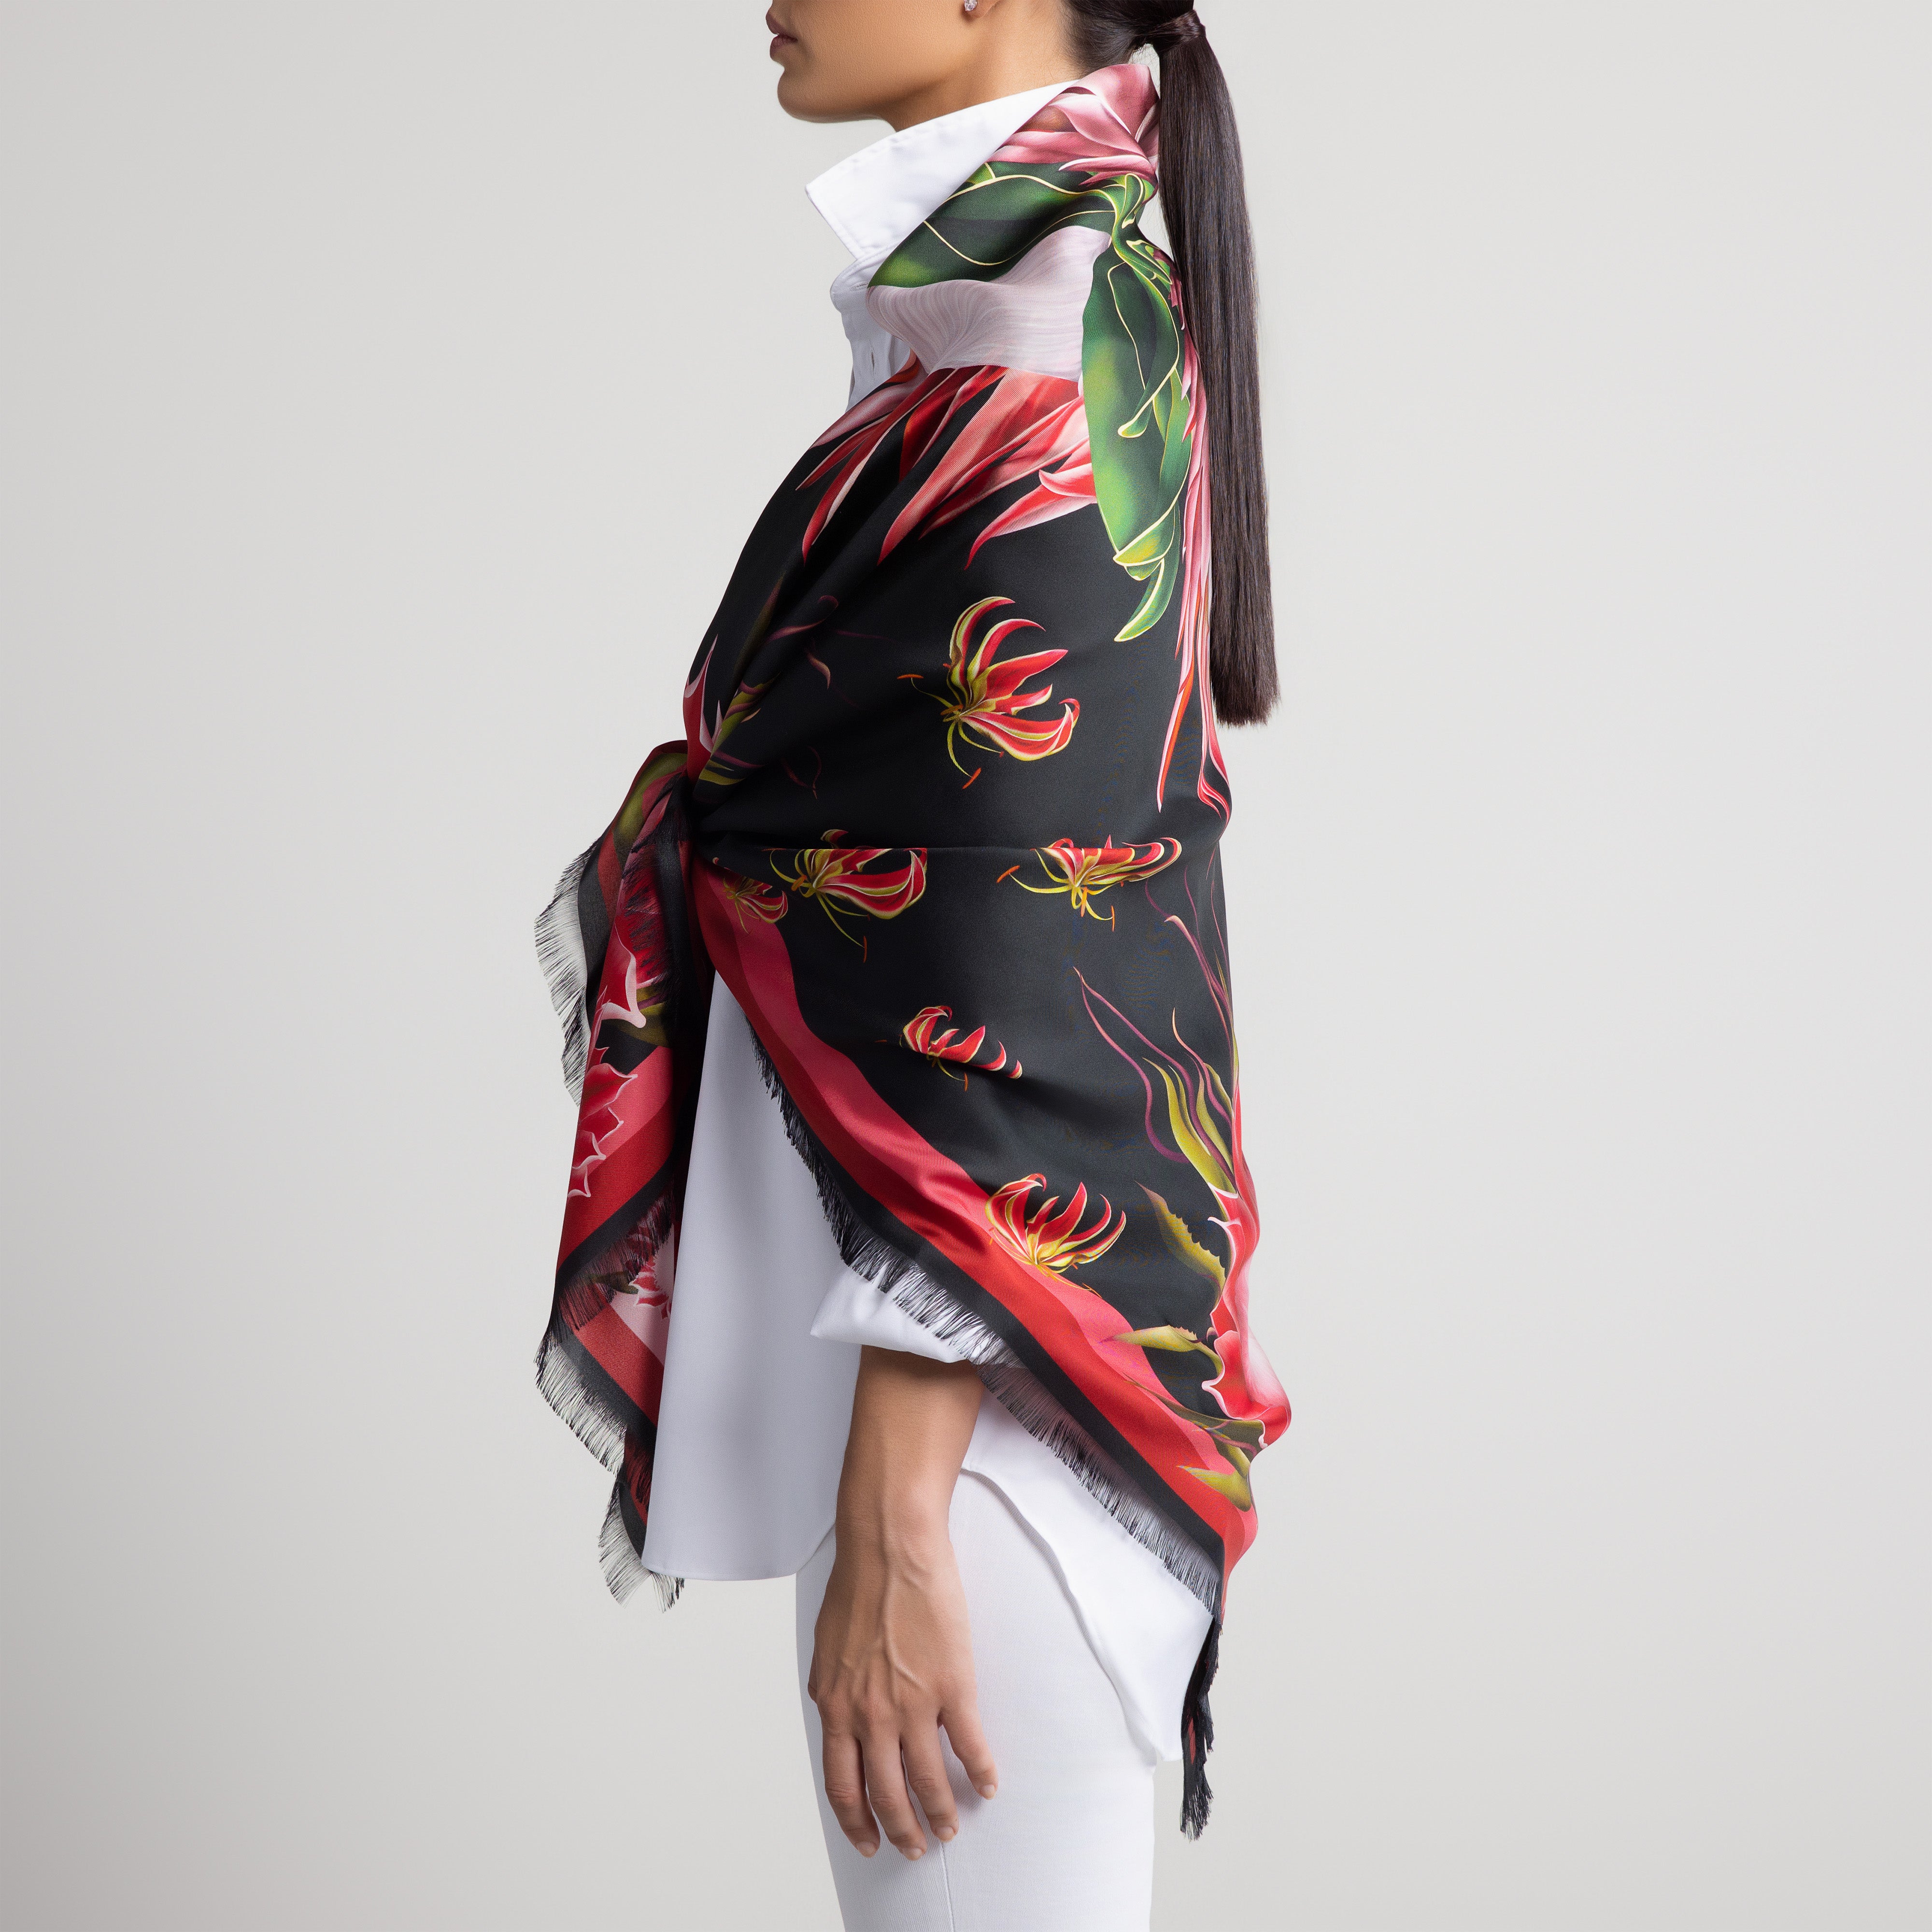 Protea Grande Silk Scarf in Black with Hand-Feathered Edges